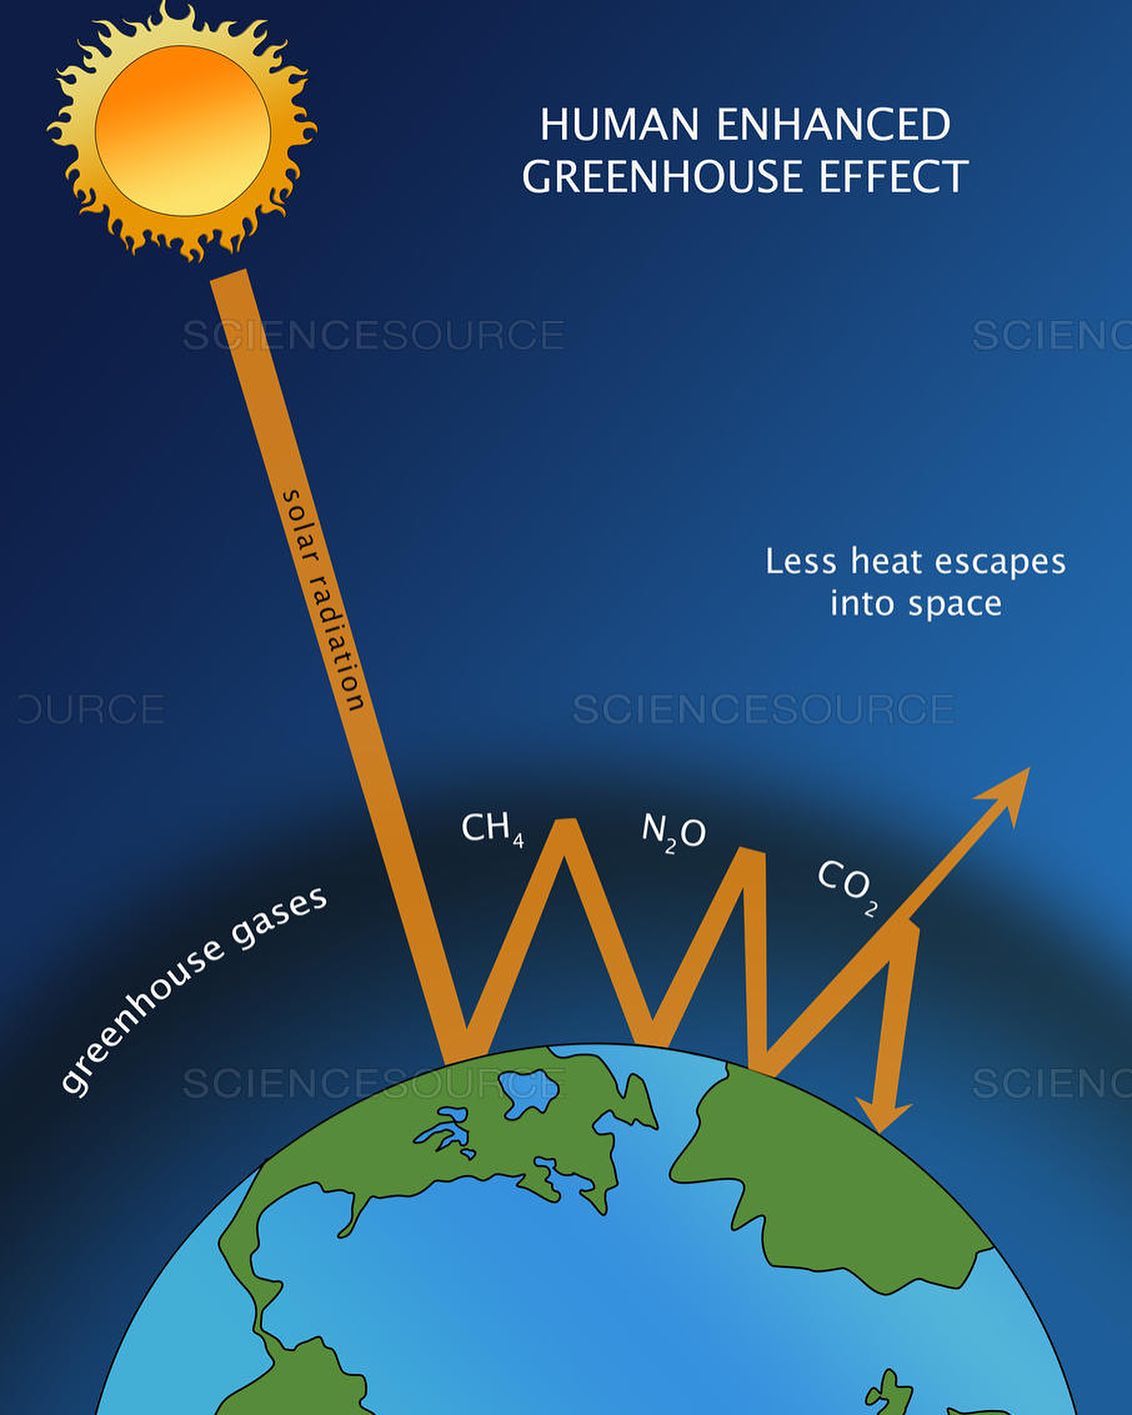 ‪Reduce man made C02!  Carbon dioxide trapping heat in the atmosphere is referred to as the "greenhouse effect." ... This thermal radiation is absorbed and re-radiated by the atmosphere's CO2 molecules back toward earth's surface, providing an additional source of heat energy.‬